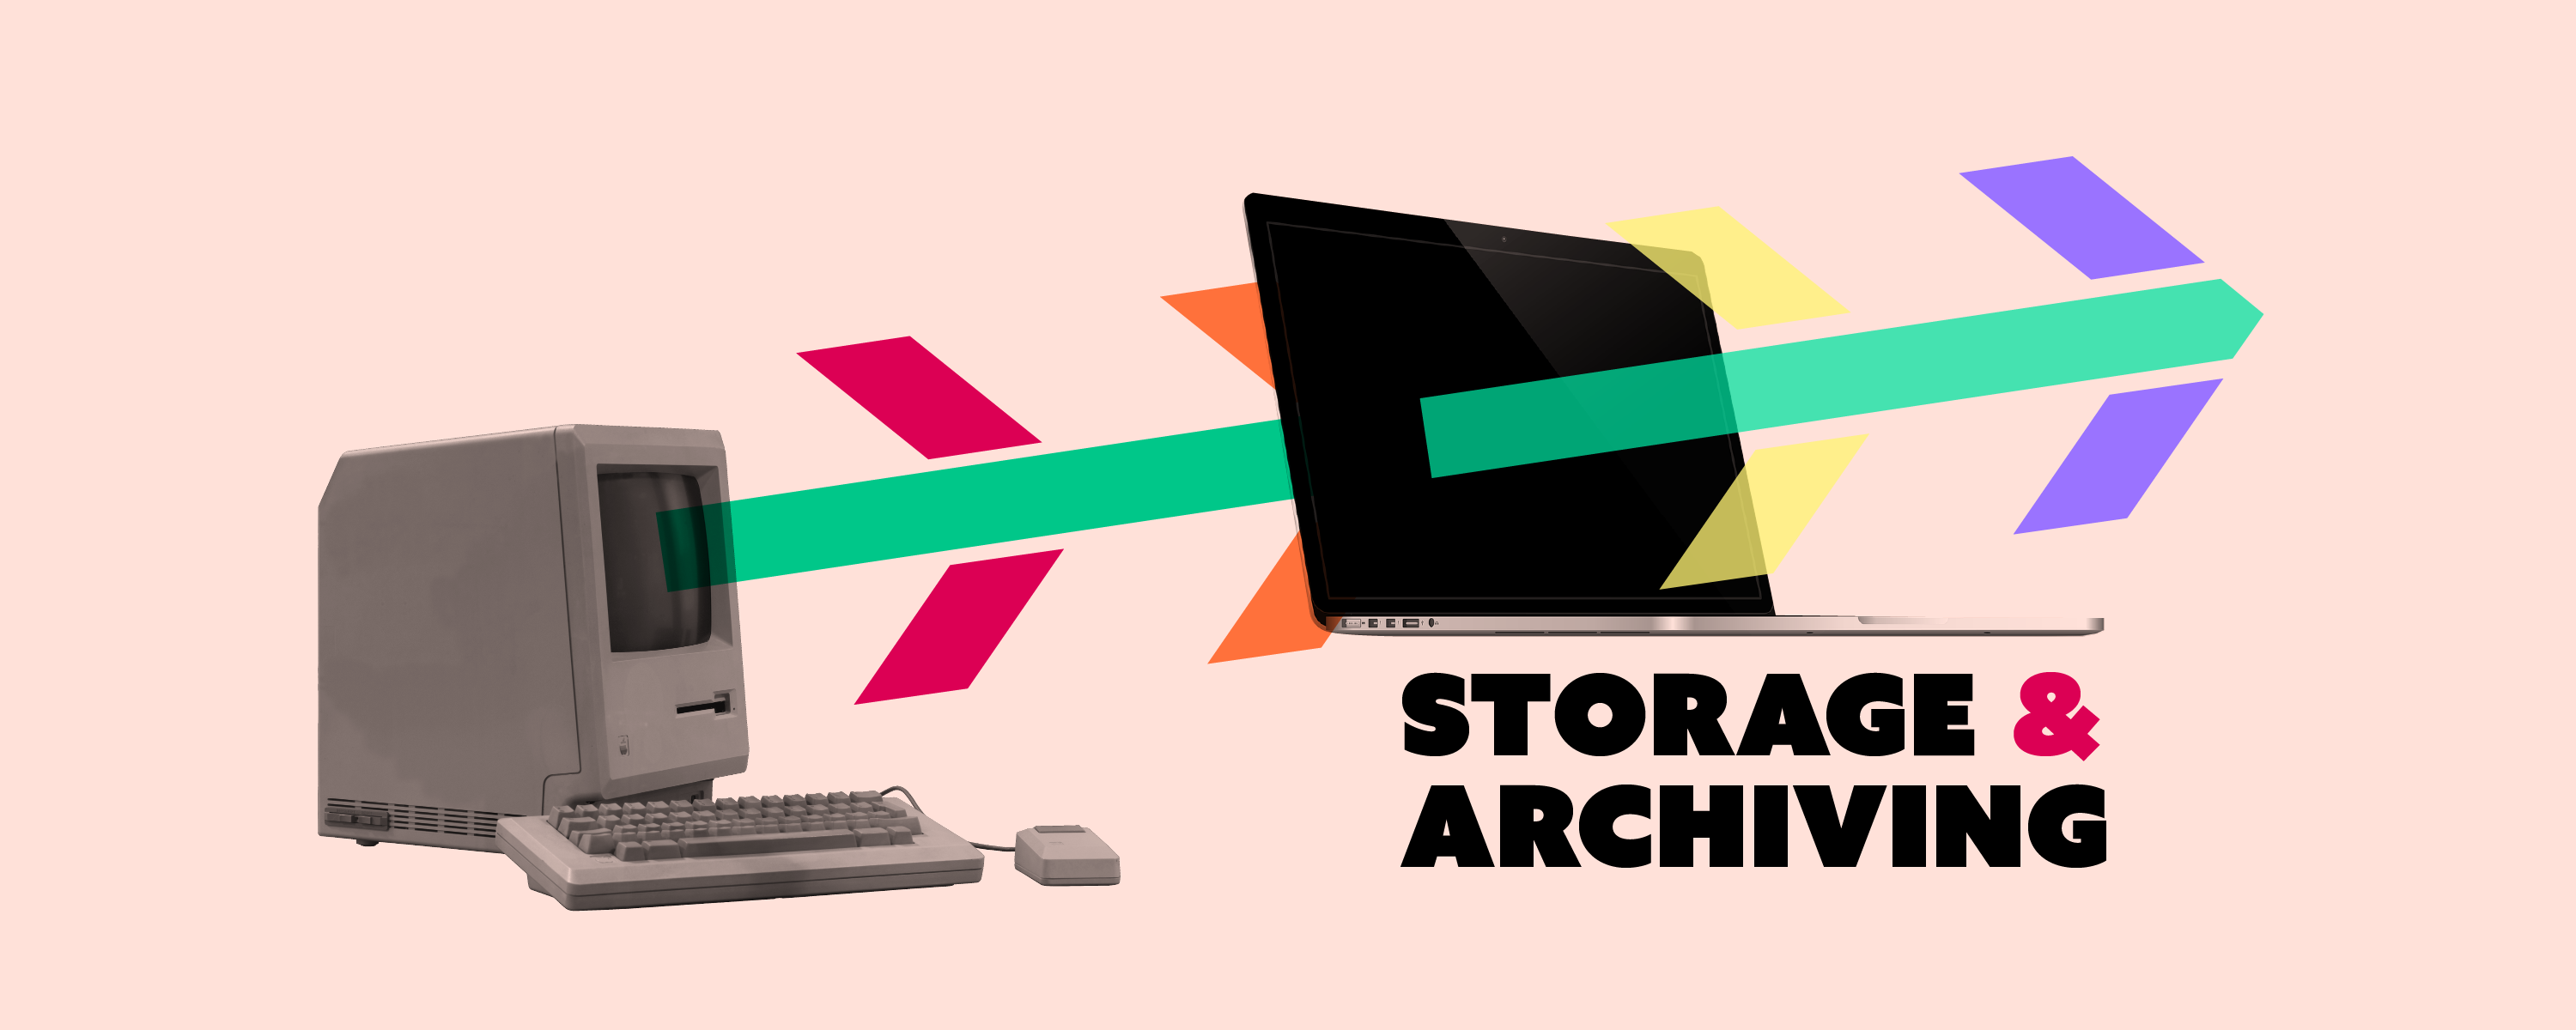 Storage and archiving